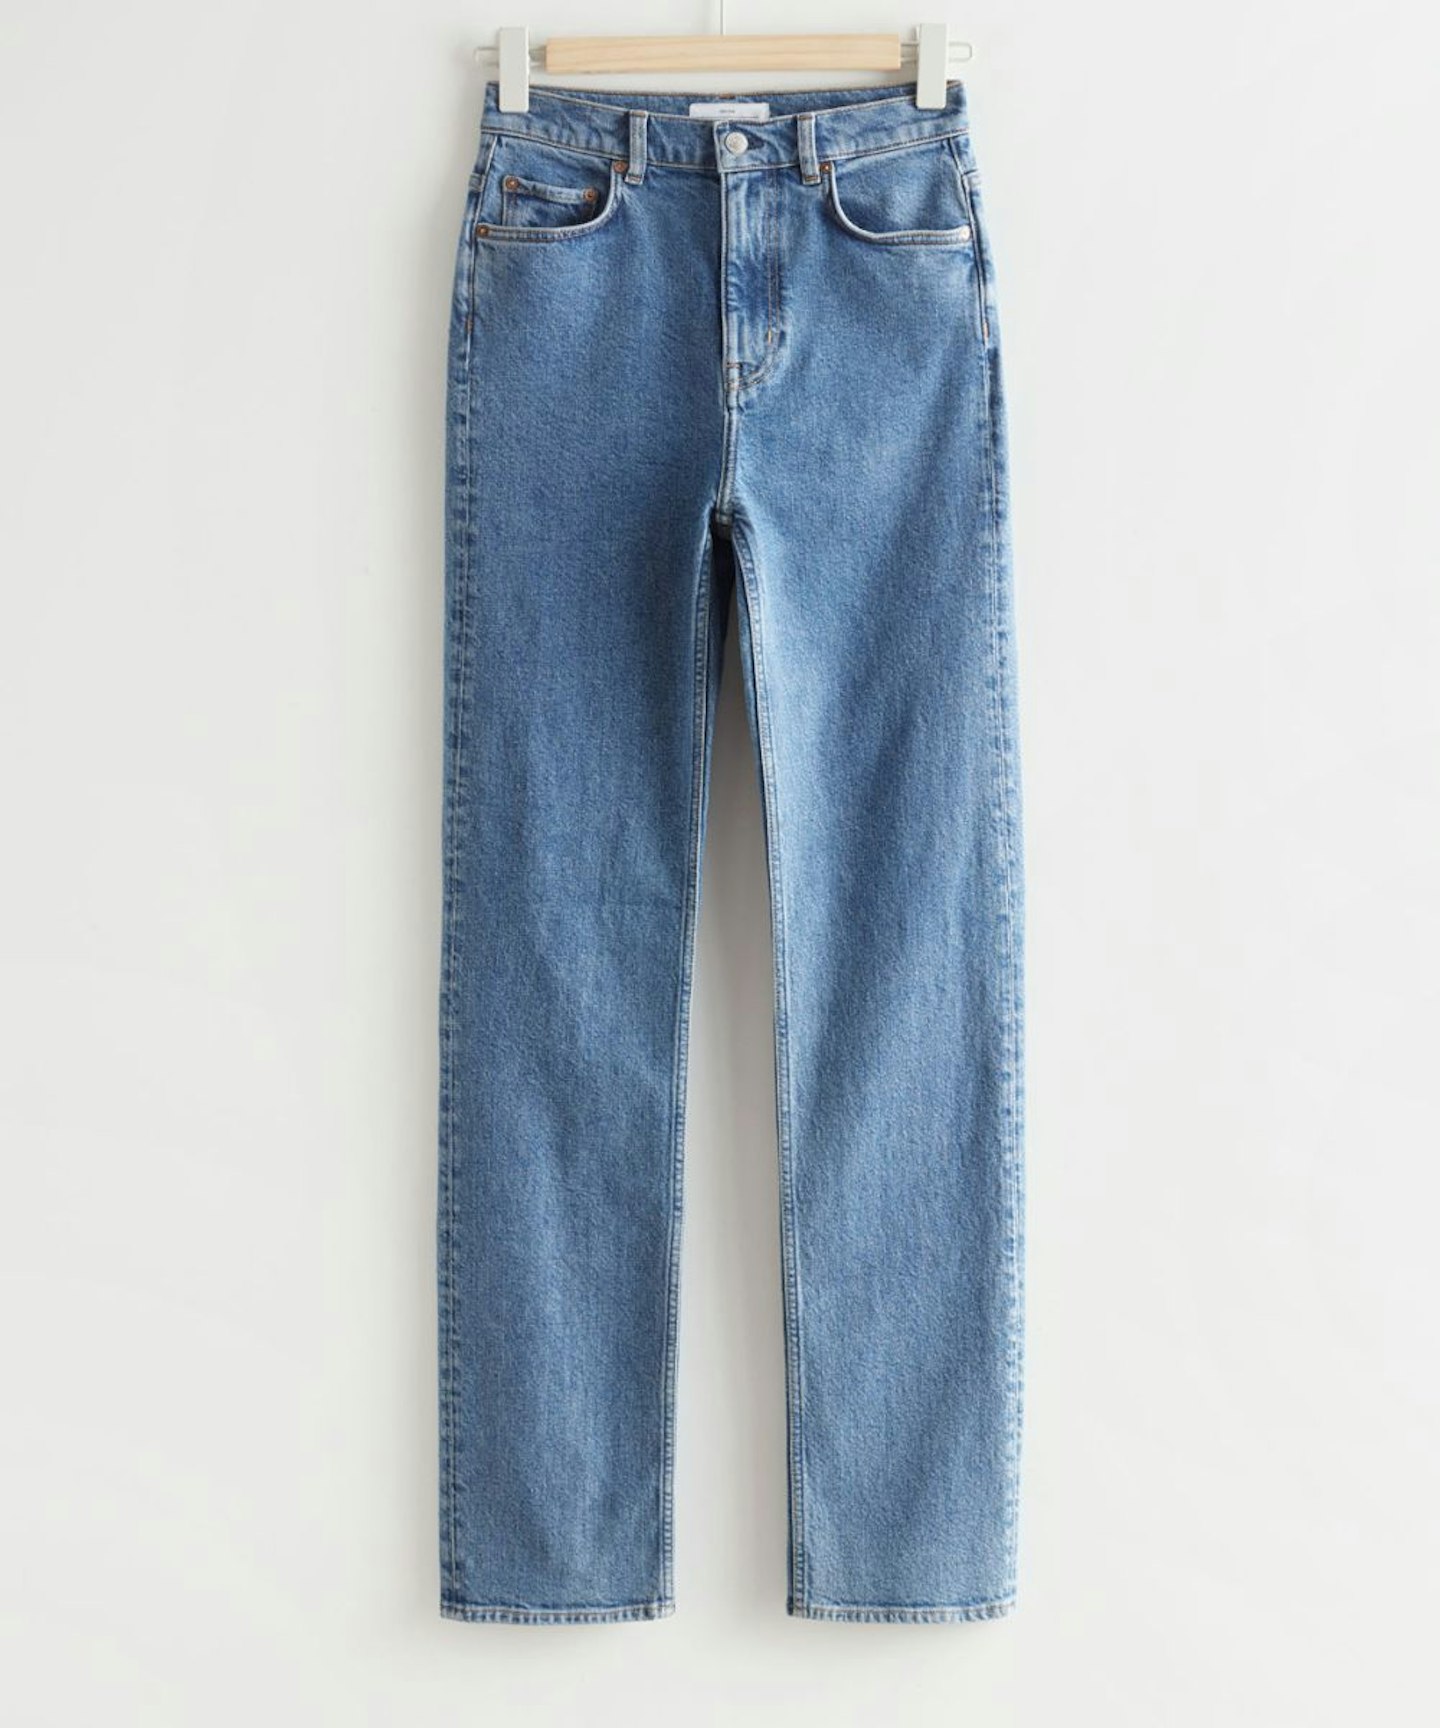 Other Stories Slim Jeans